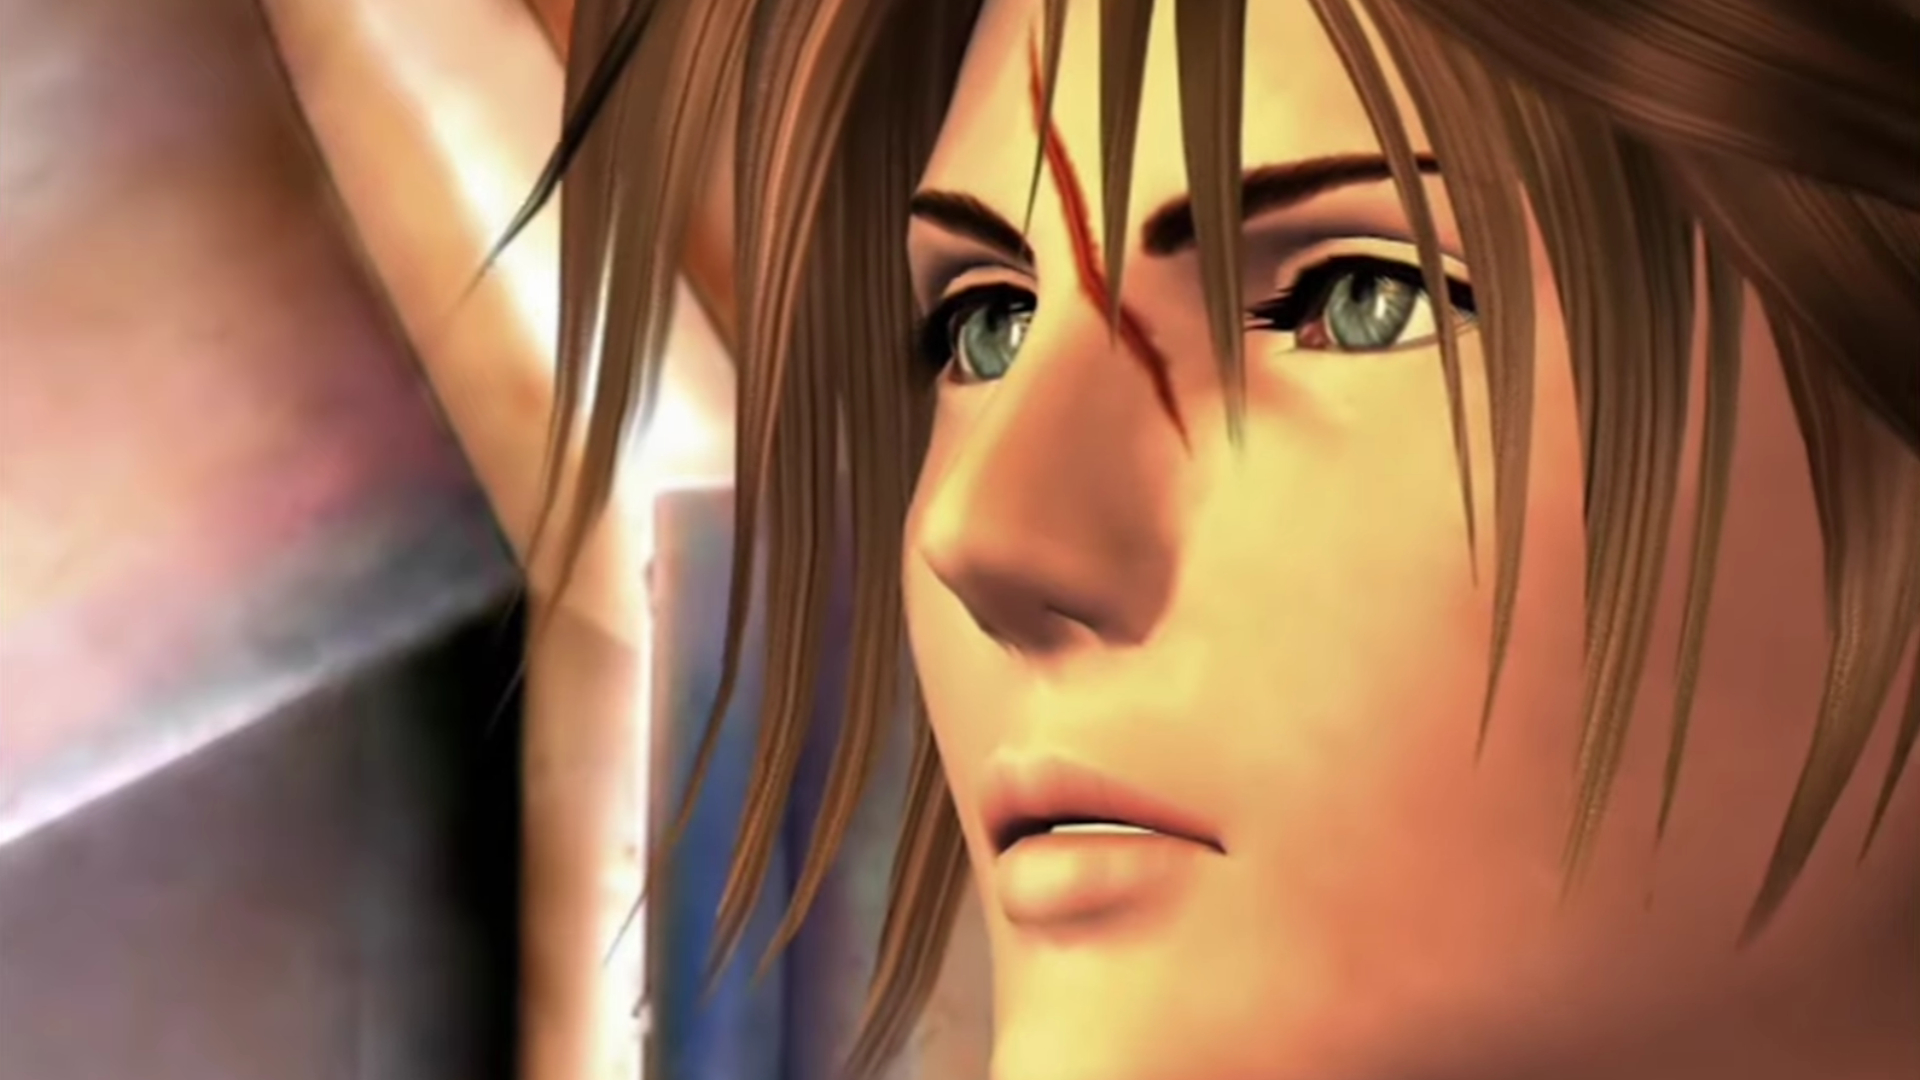 A Final Fantasy VIII Remake Would Have To Be Developed By Younger Staff,  Director Says